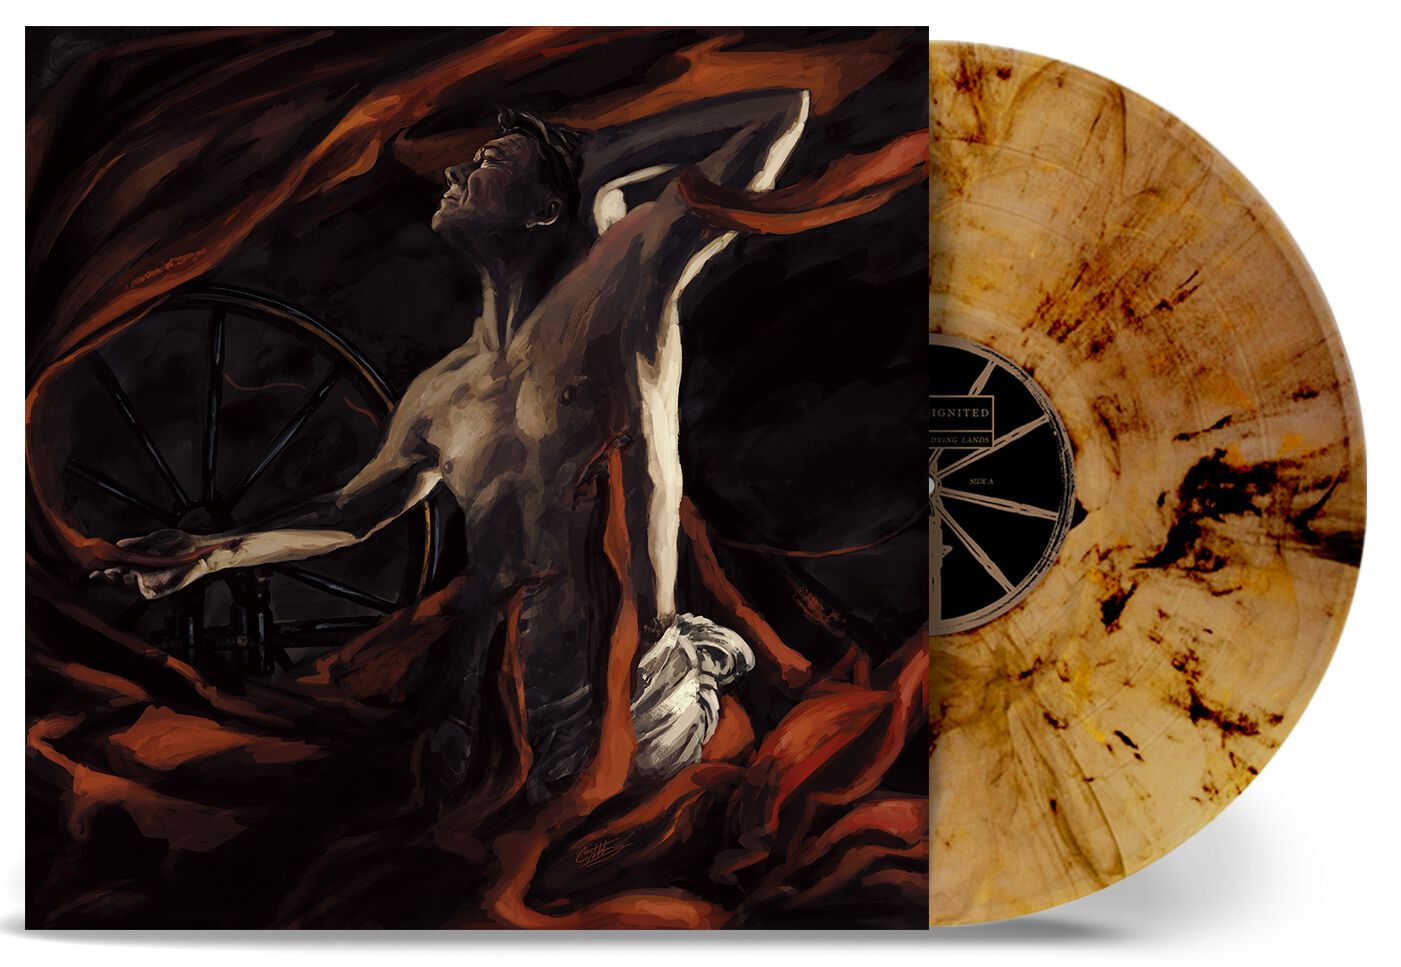 Horizon Ignited Towards the dying lands LP marbled